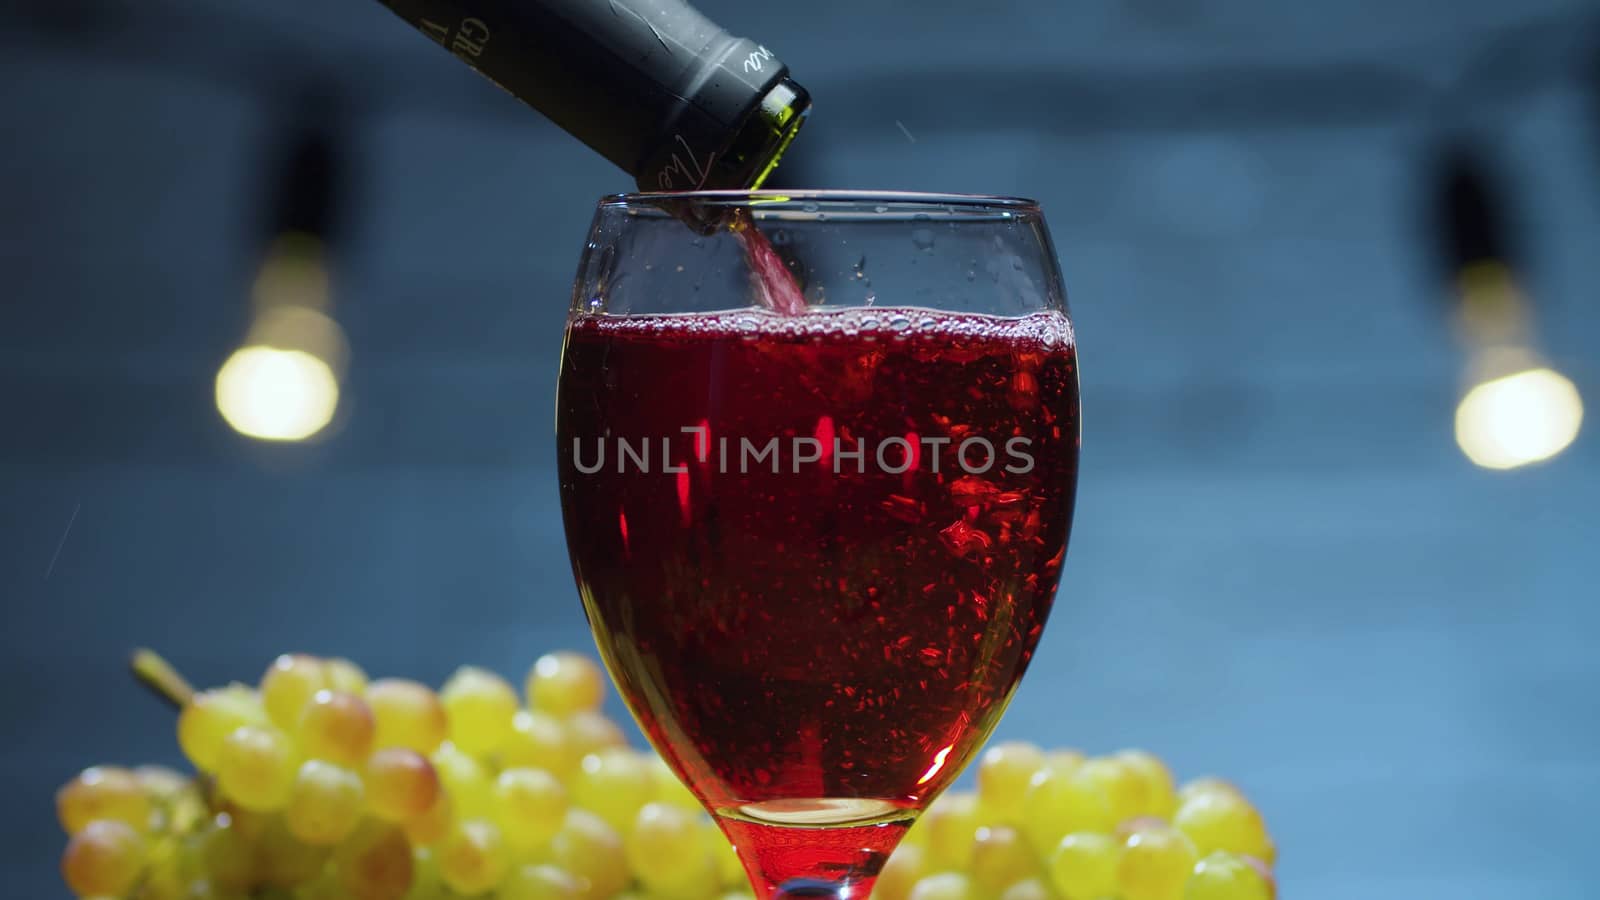 Close up red wine pouring into a glass. Bunches of grapes on the table. Blurry lamps on blue background